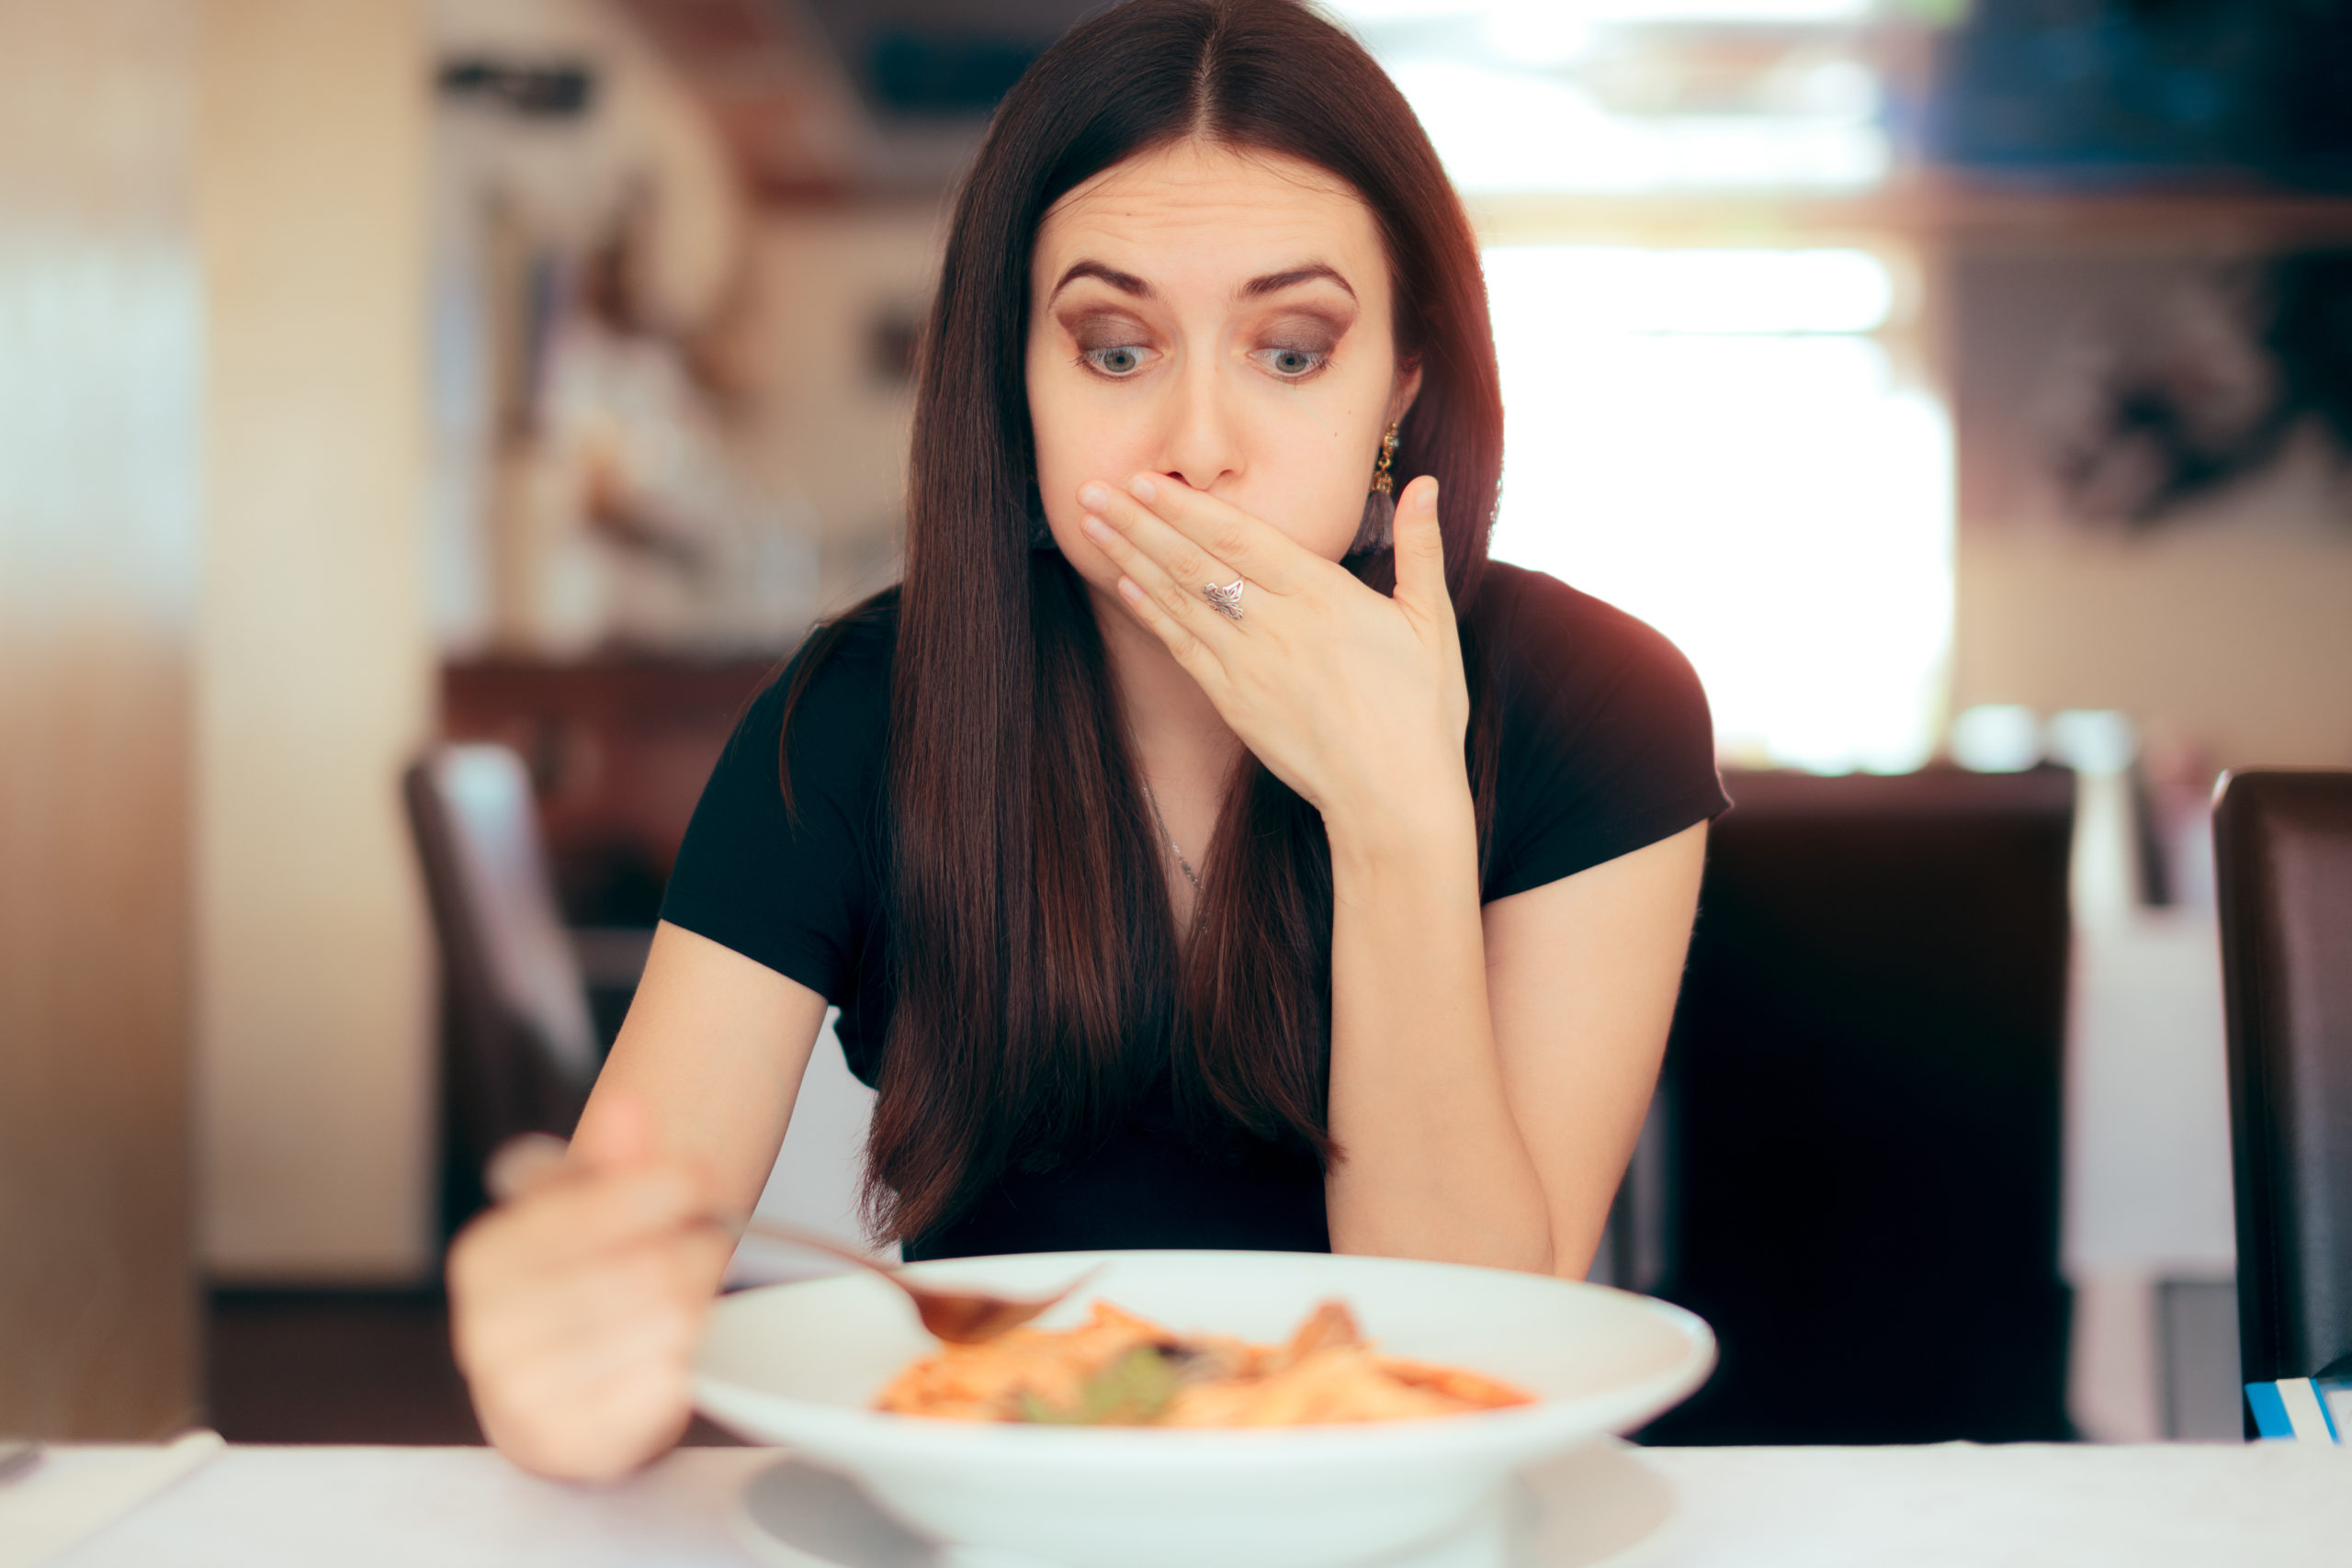 food poisoning can you sue the restaurant